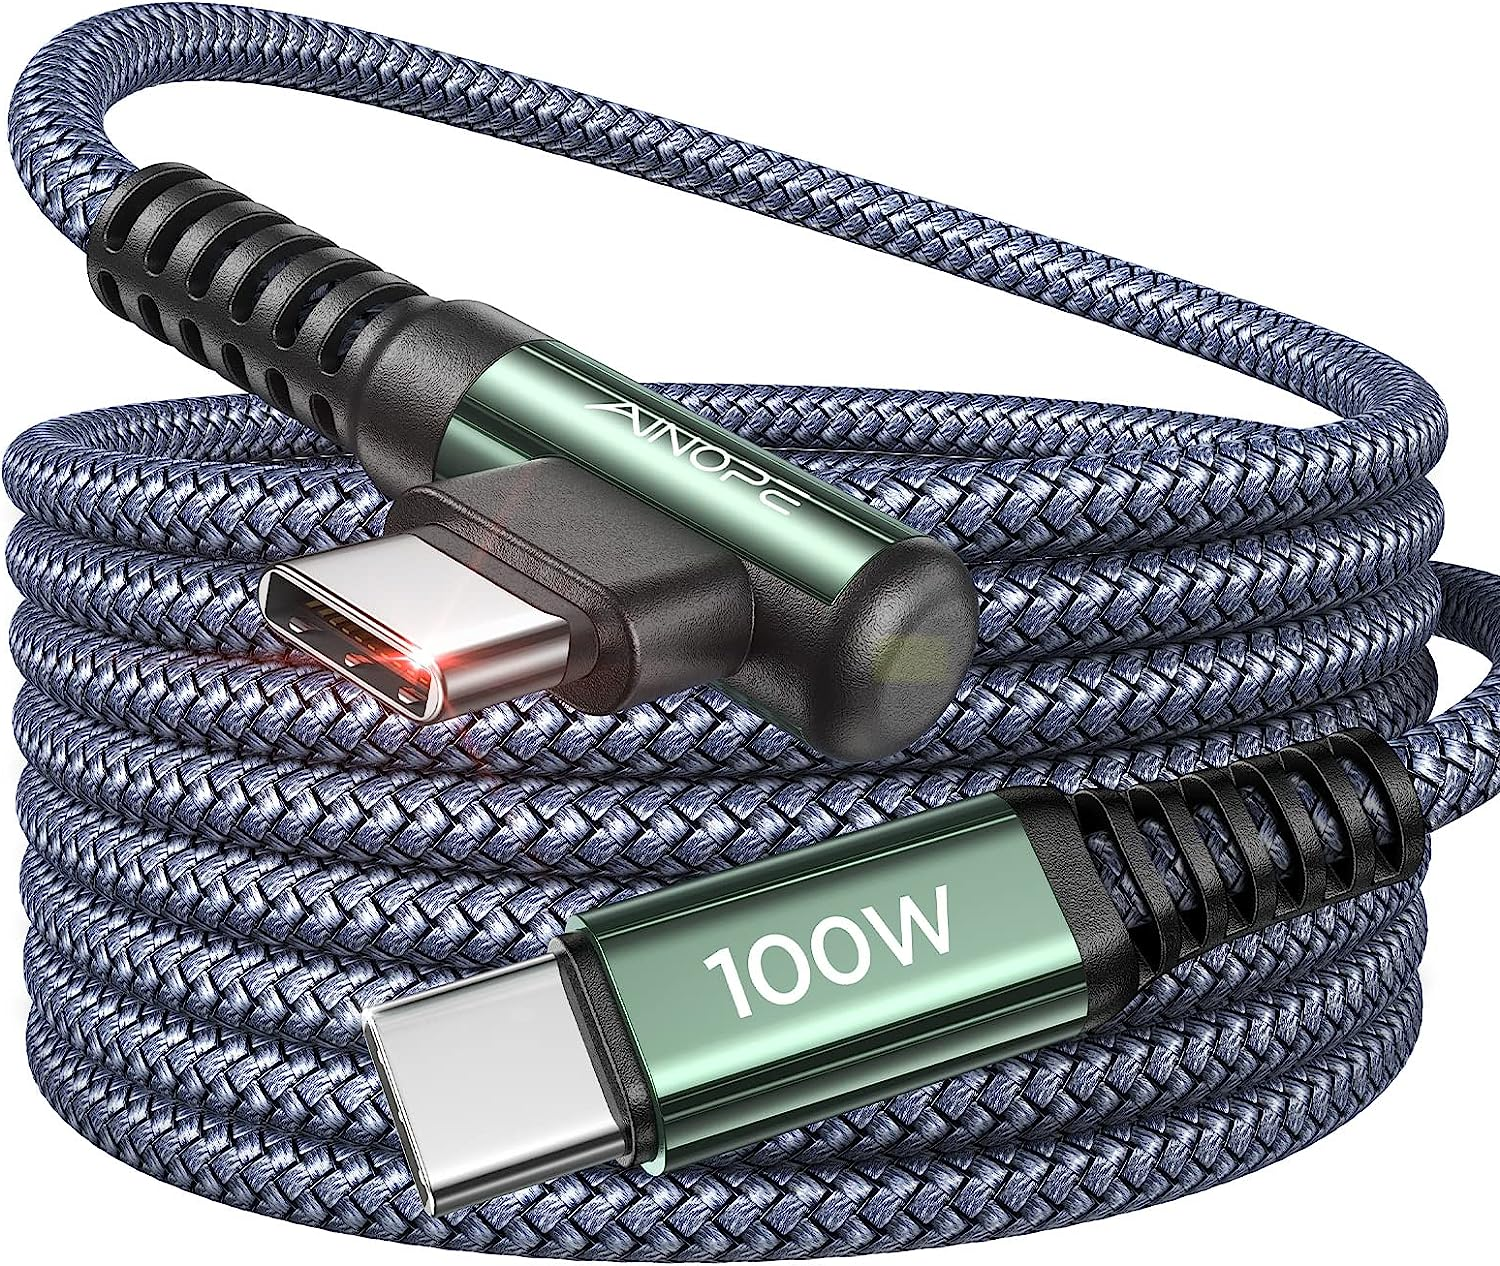 AINOPE 100W USB C to USB C Cable 10ft, USB C Charger Cable $6.99 (For Prime Member)